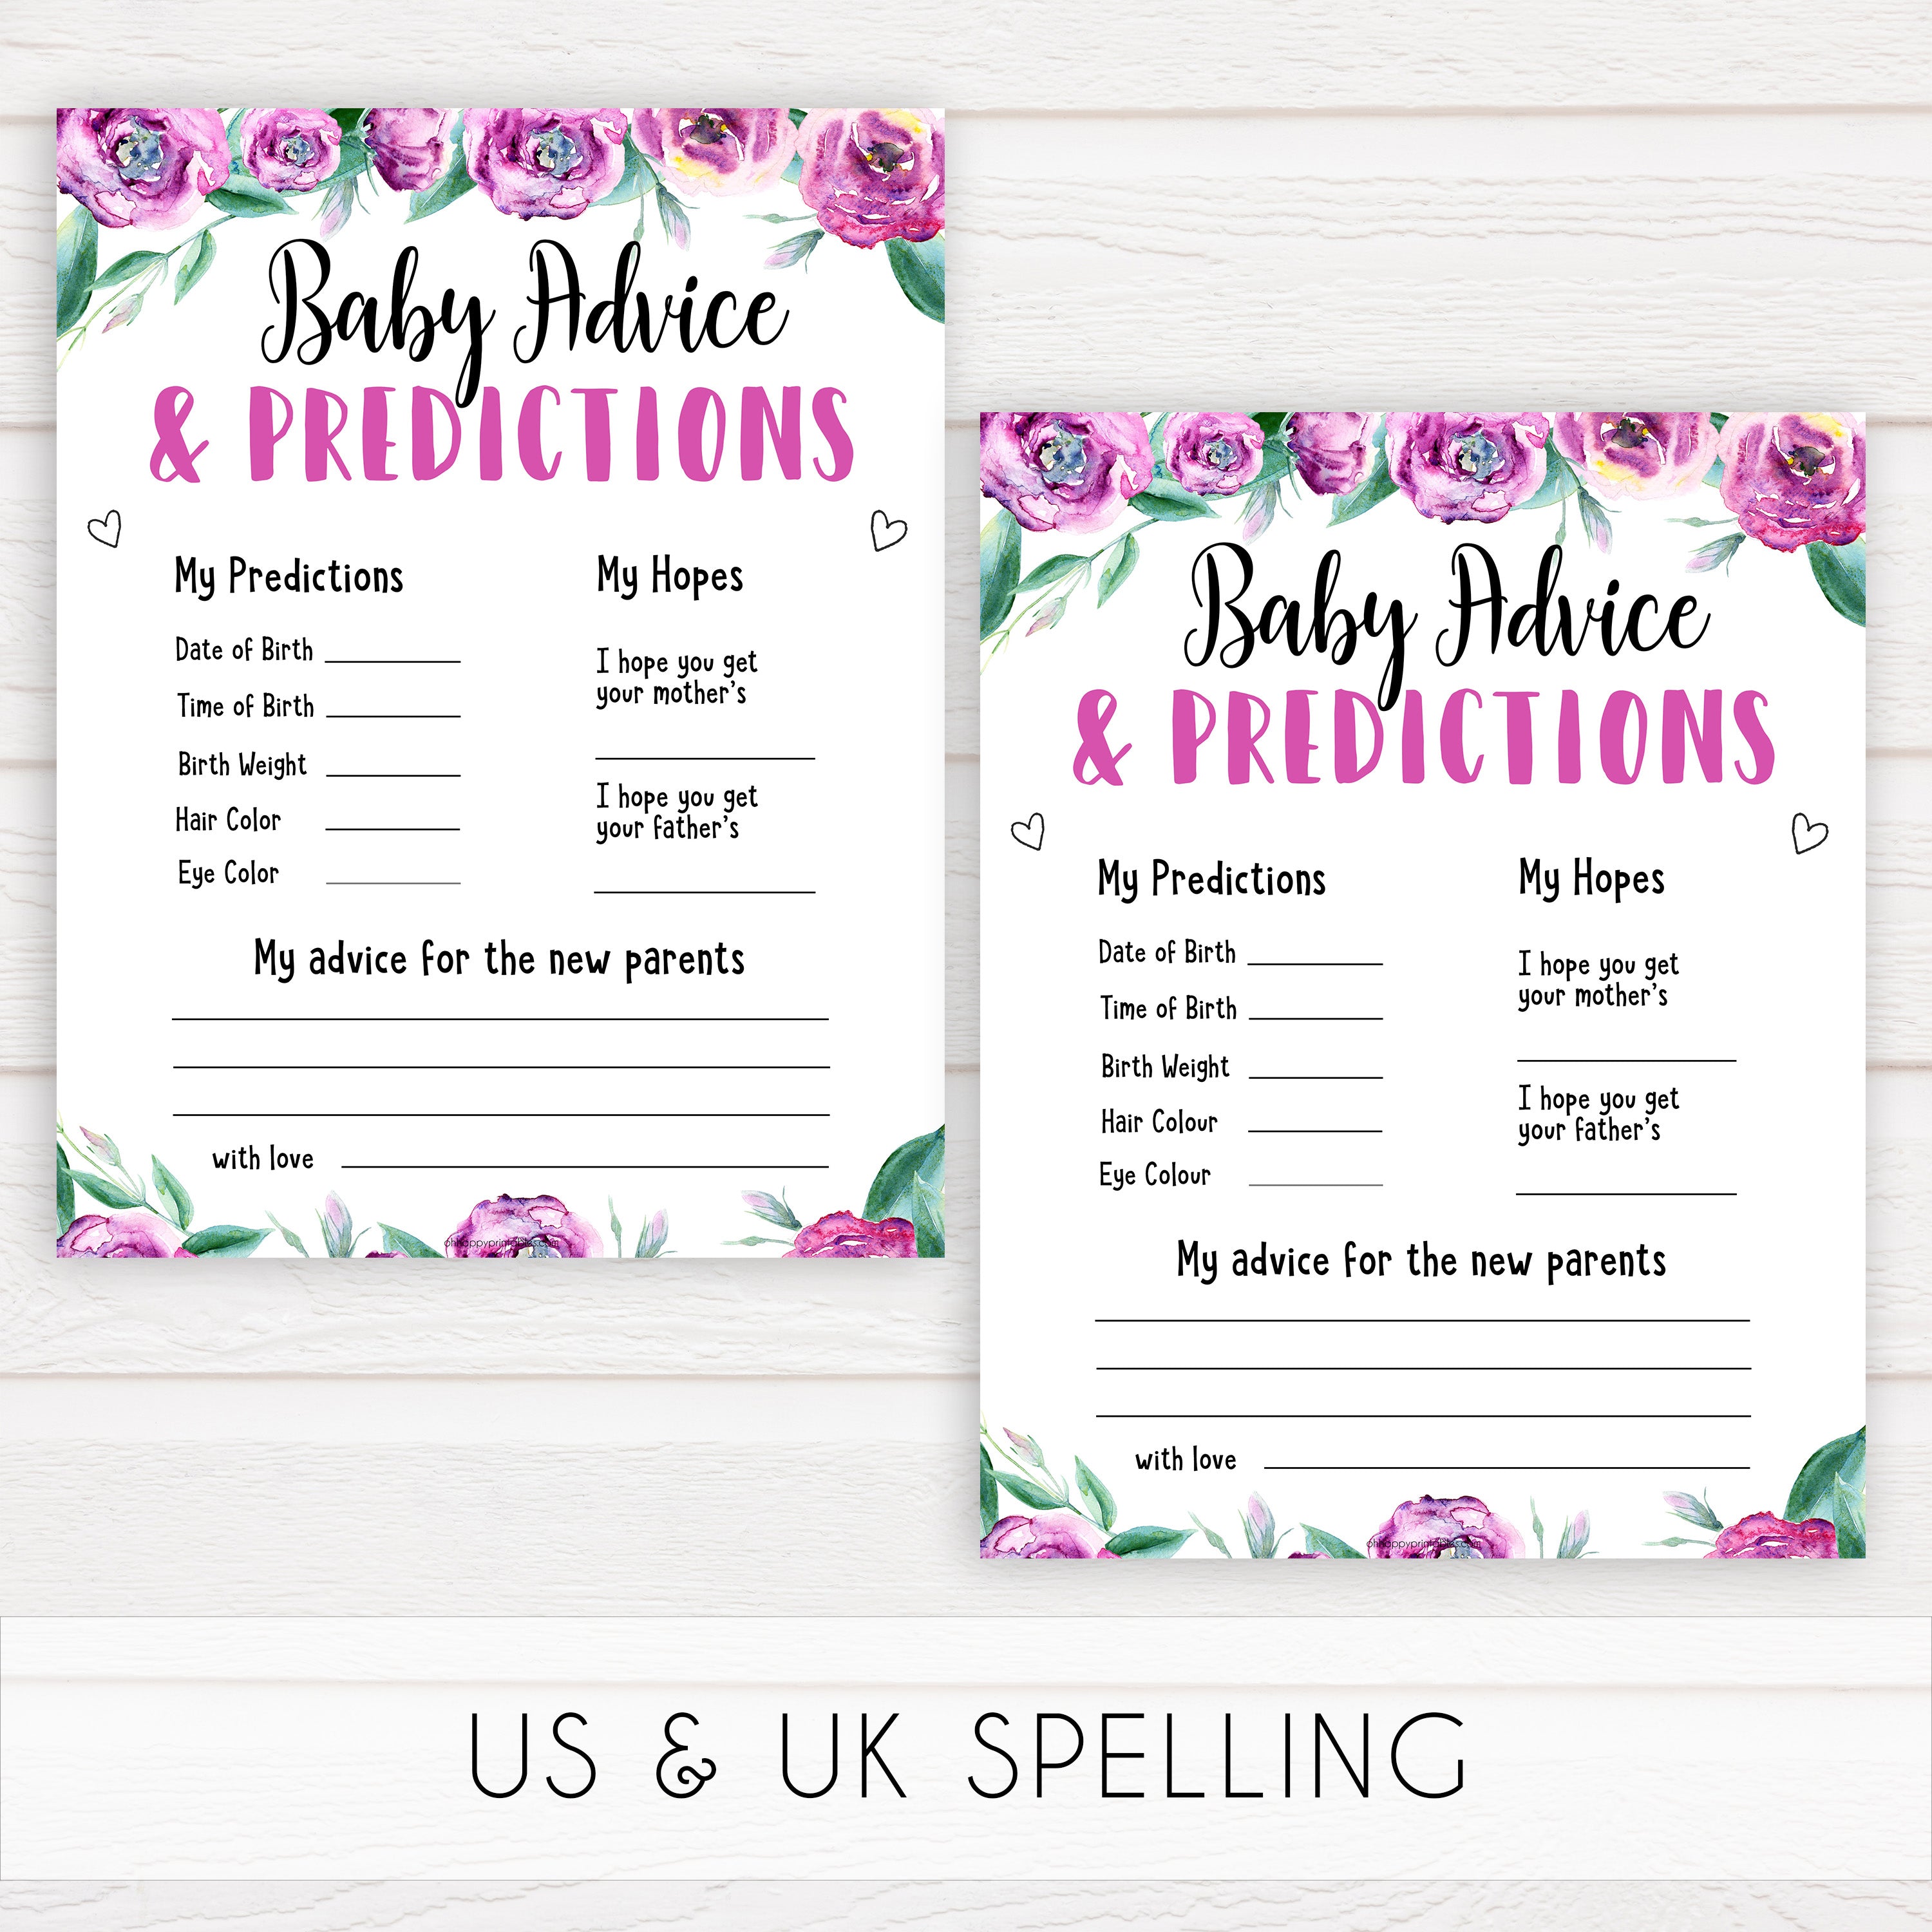 Purple peonies baby advice and predictions baby shower games, printable baby shower games, fun baby shower games, baby shower games, popular baby shower games, floral baby shower games, purple baby shower themes